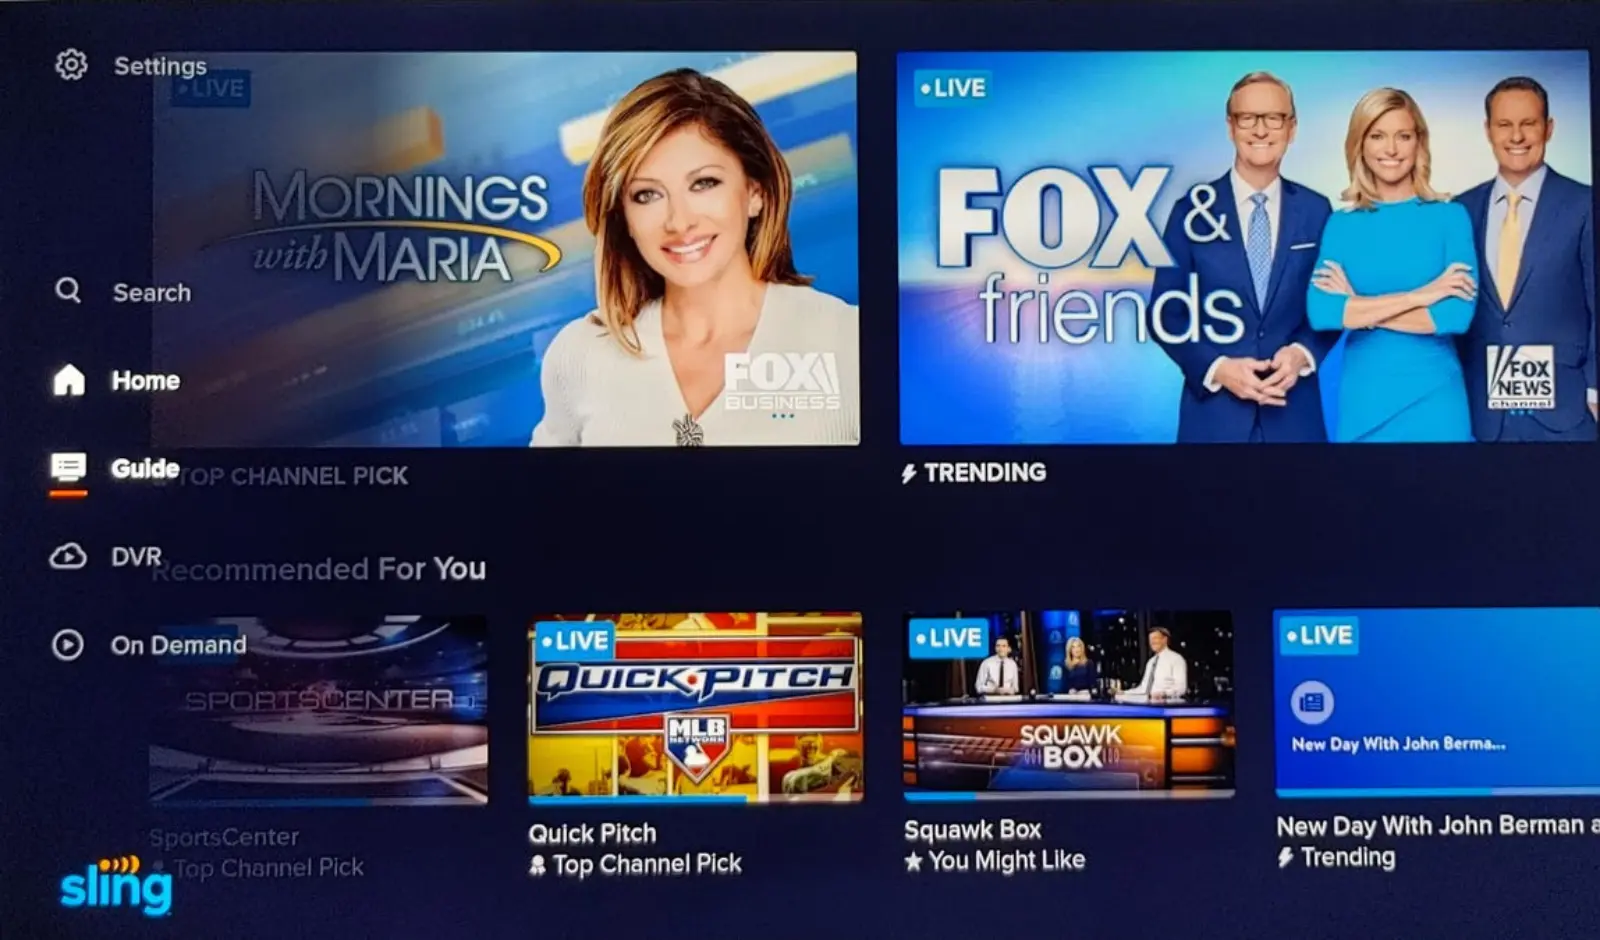 Sling TV Orange vs. Blue – Is There a Clear Winner